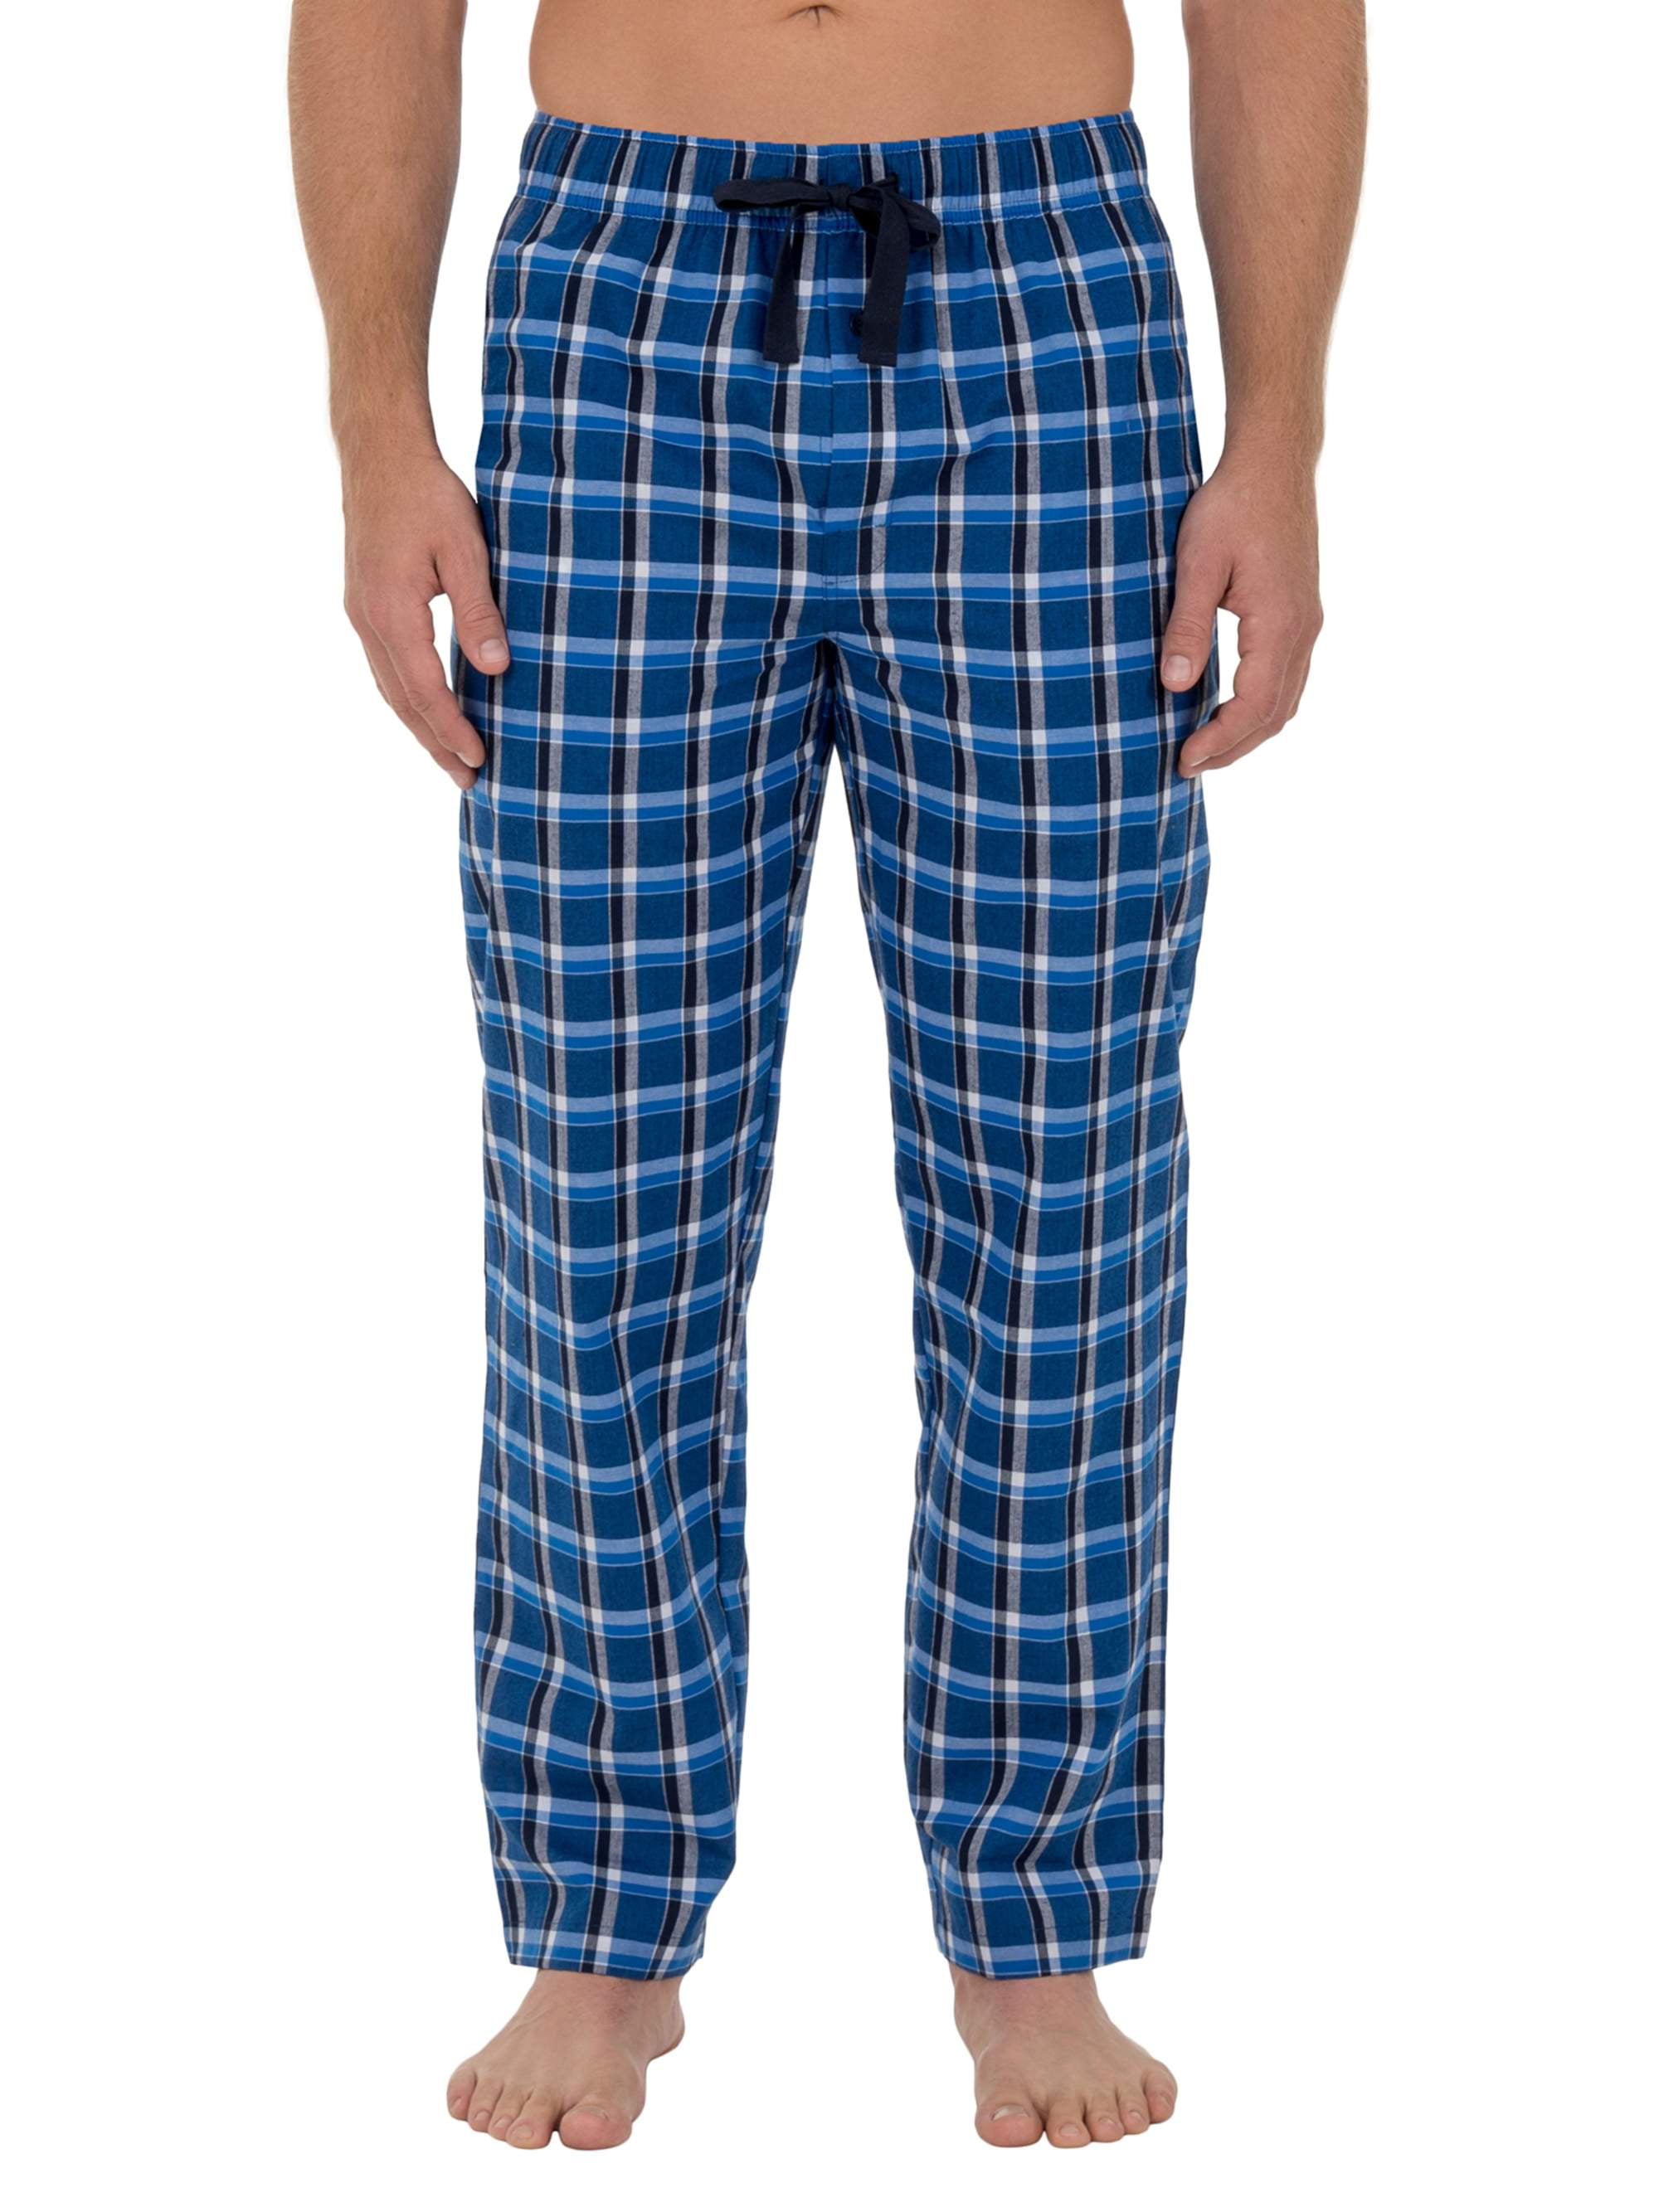 Buy Fruit of the Loom Men's and Big Men's Microsanded Woven Plaid ...